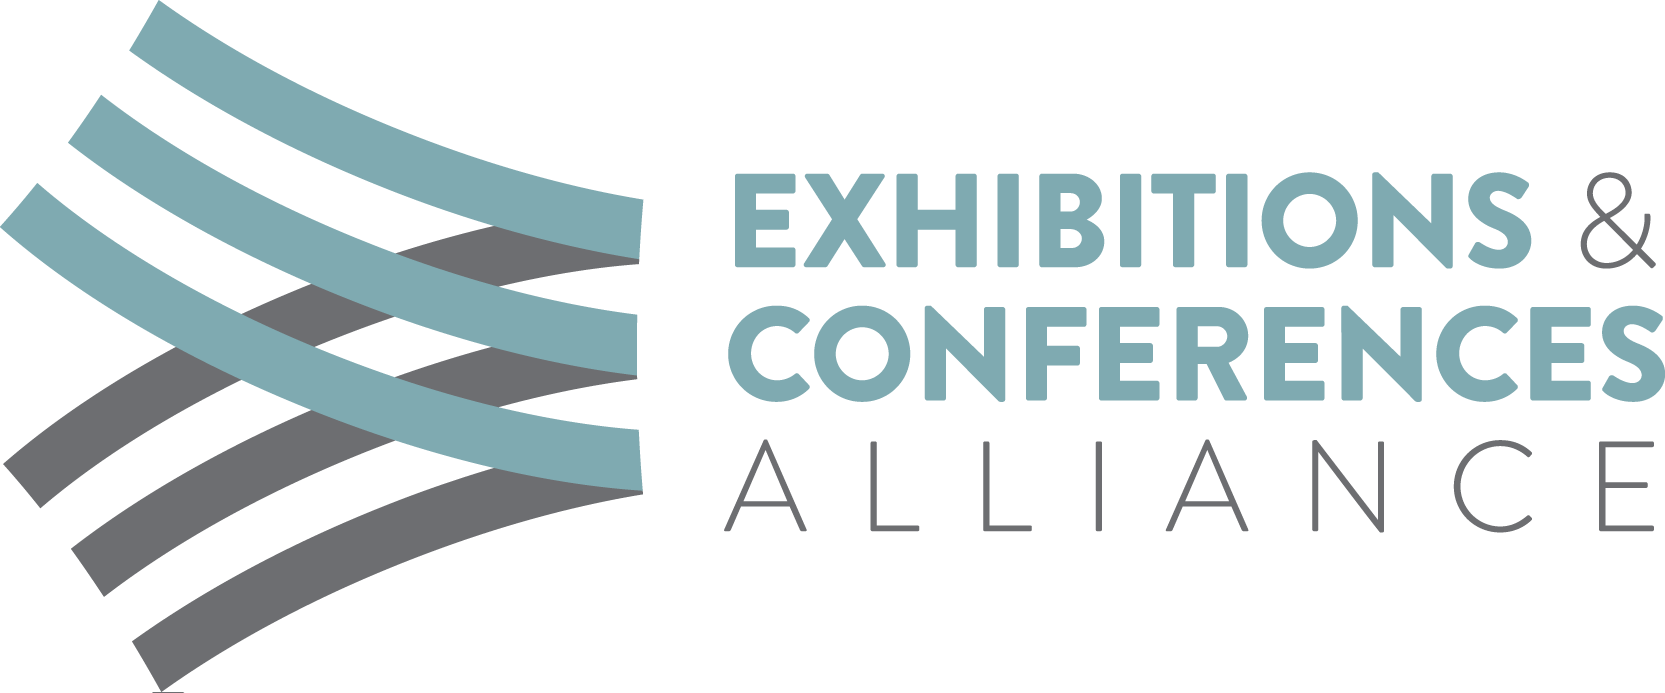 Exhibitions and Conferences Alliance